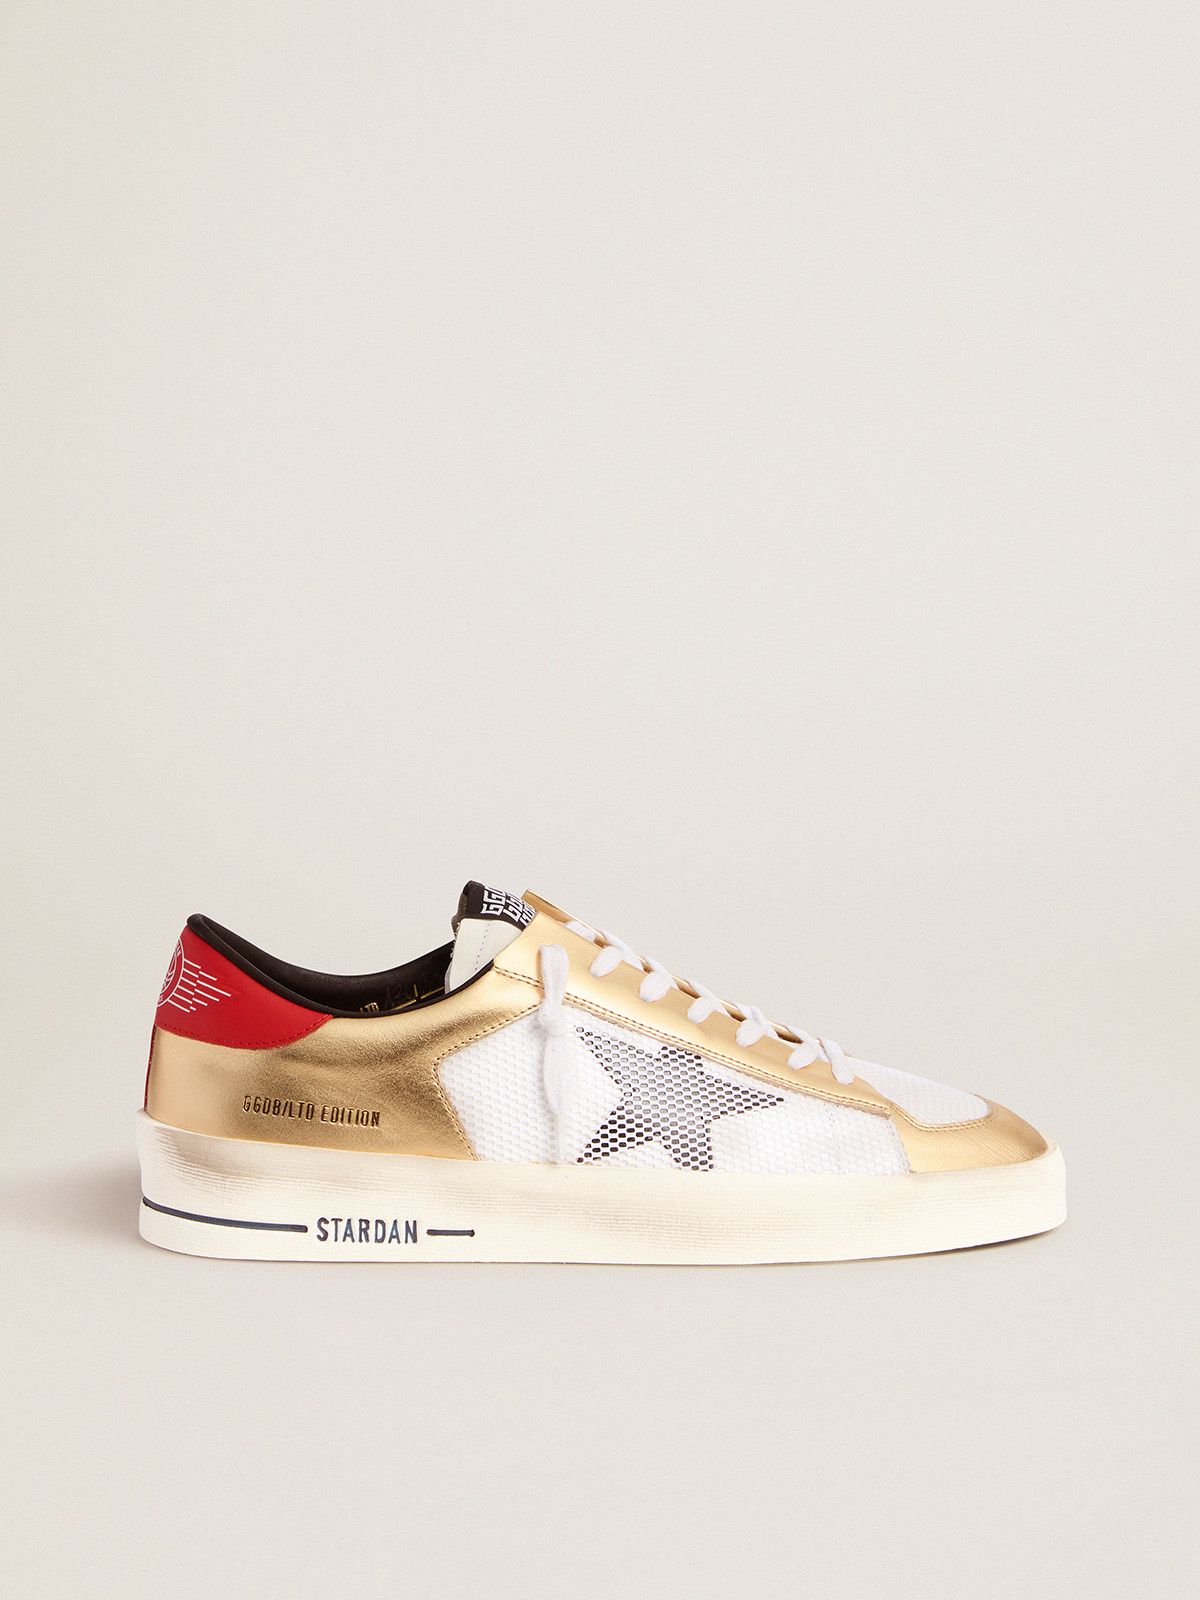 golden goose with Stardan inserts Women's sneakers Limited gold Edition